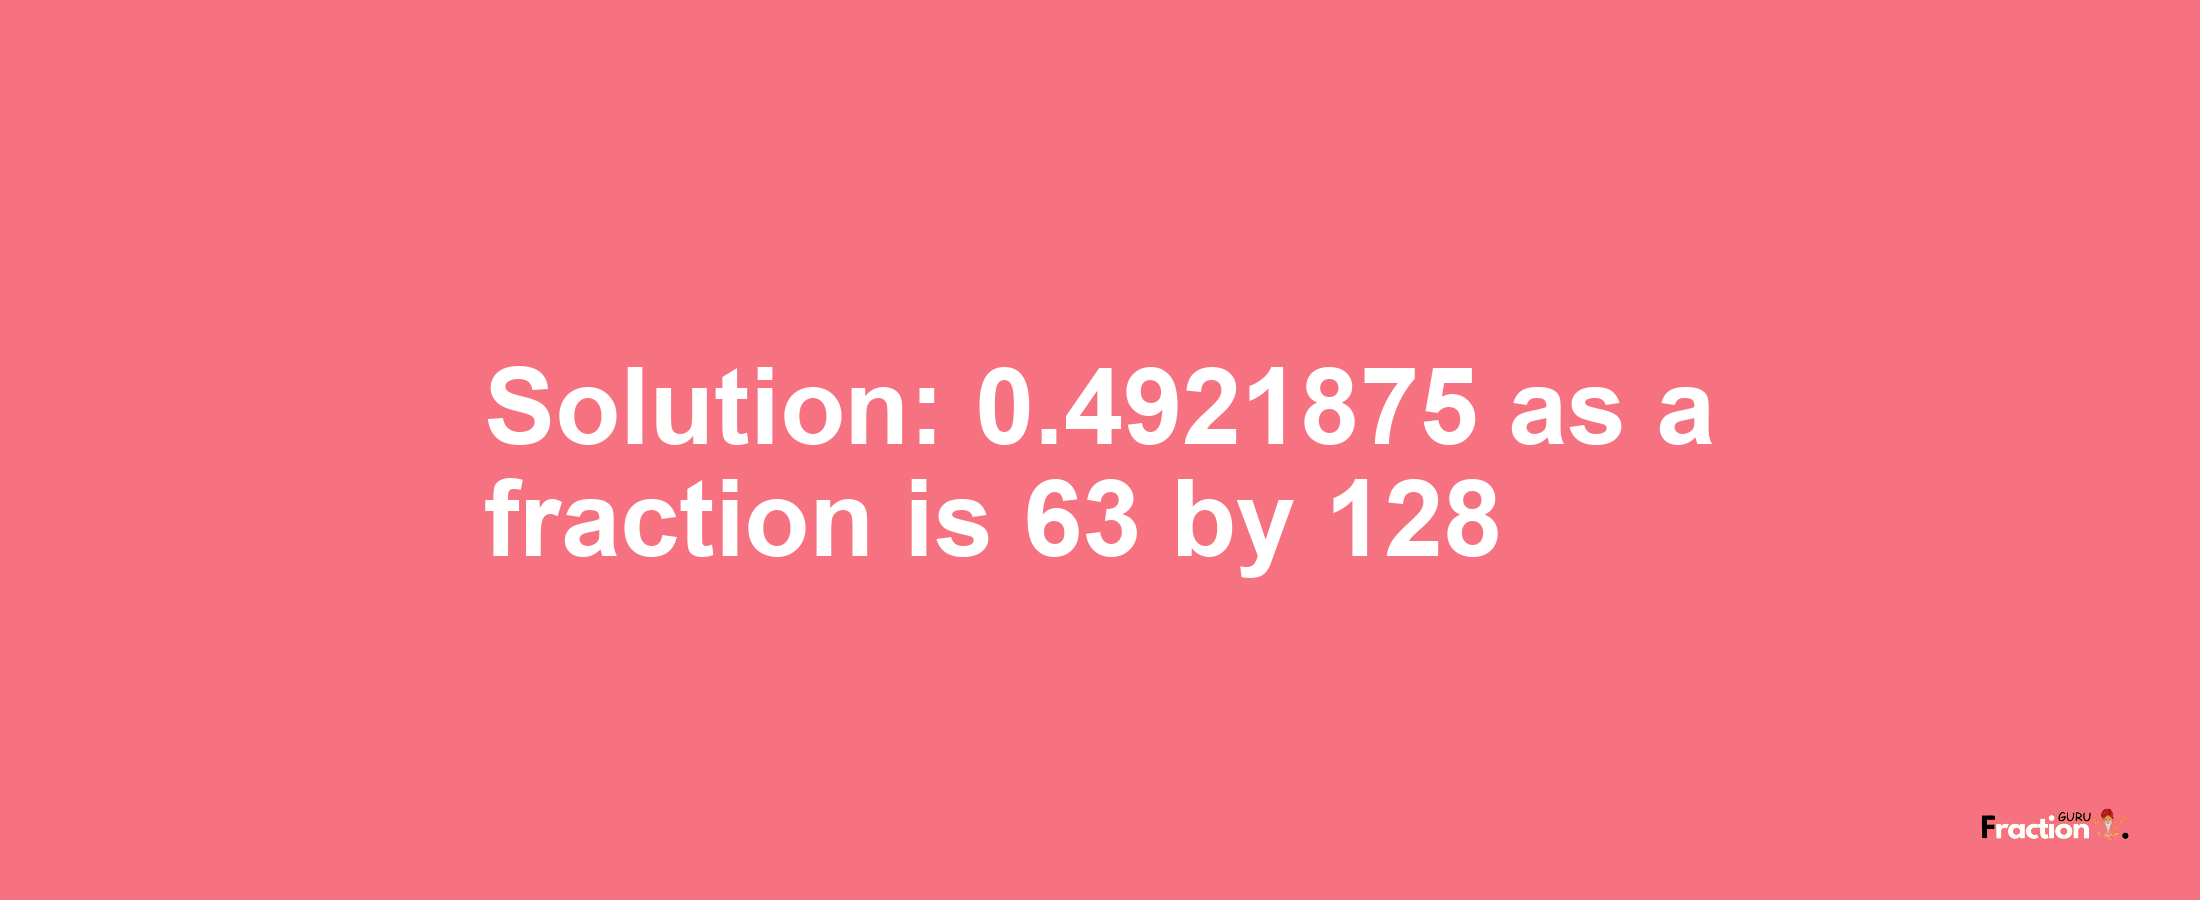 Solution:0.4921875 as a fraction is 63/128